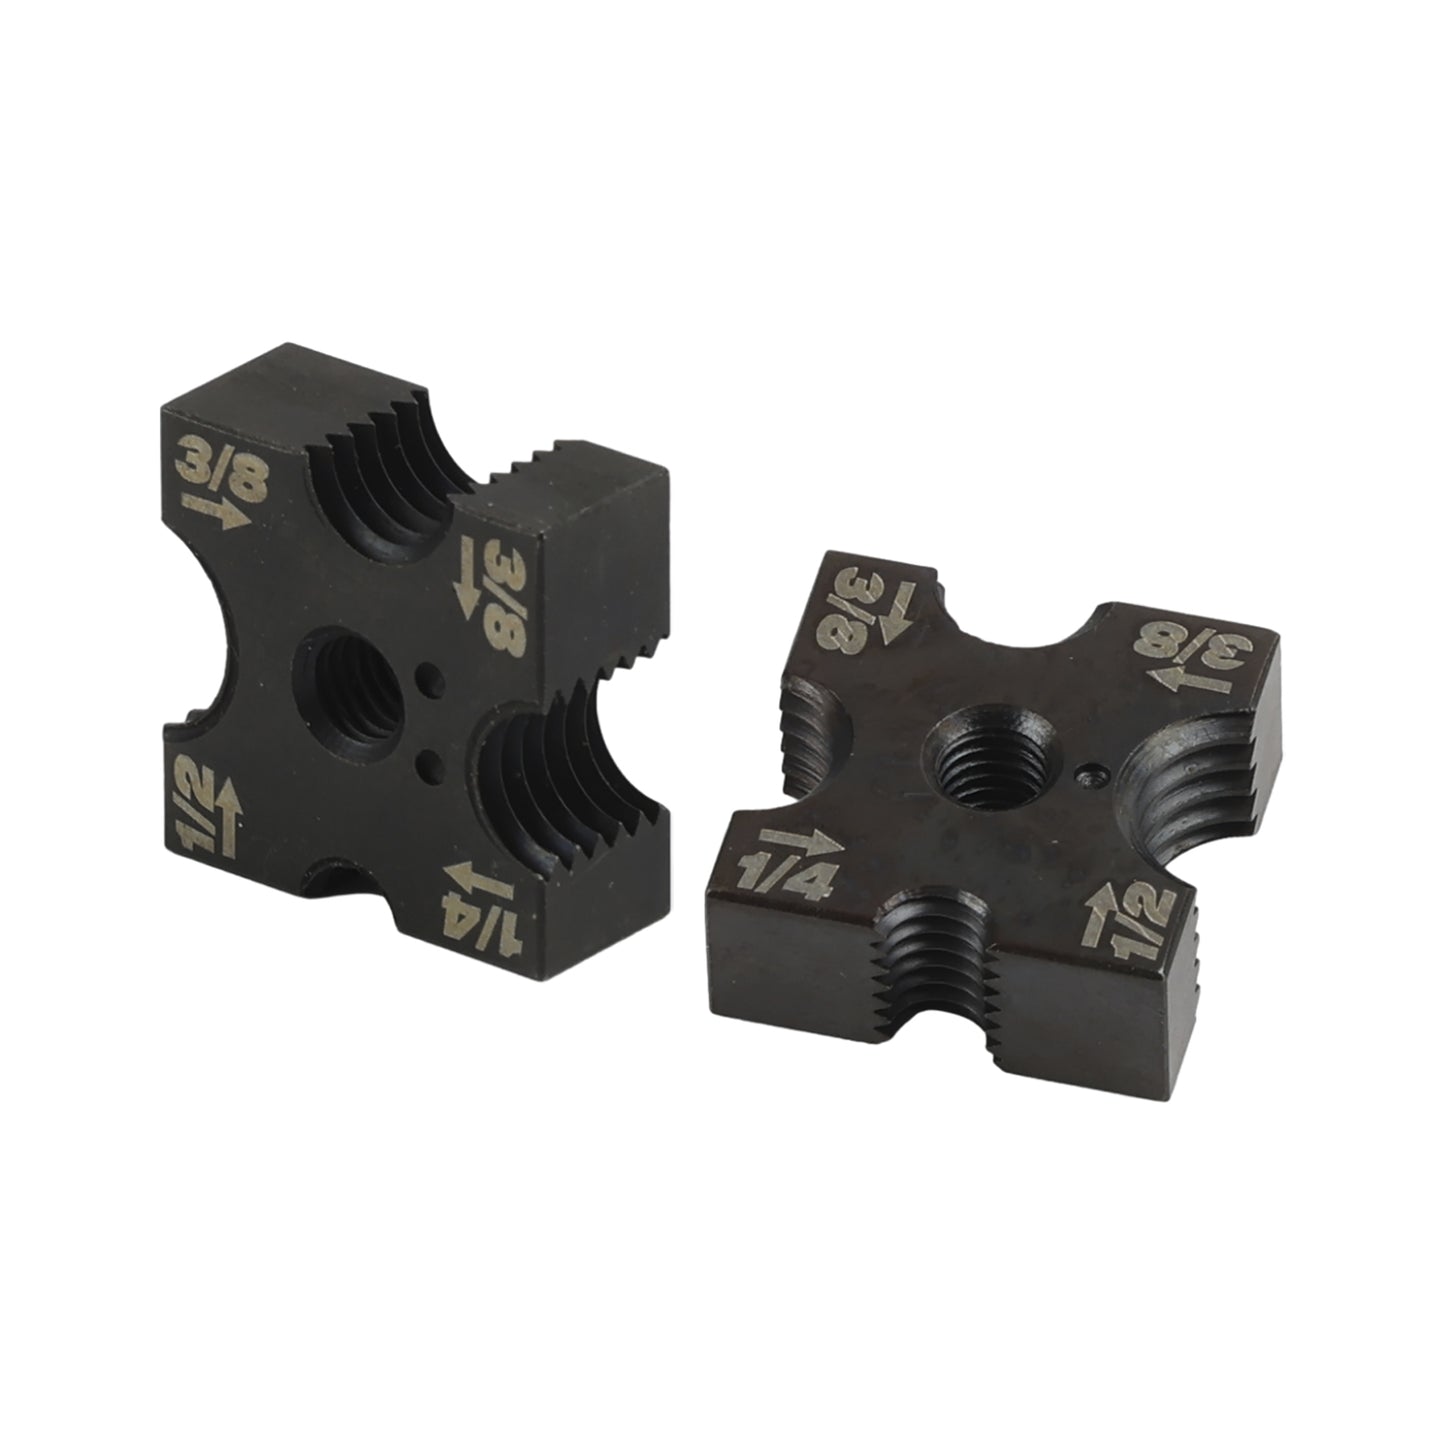 48-44-2872 1/4" 3/8" 1/2" Cutting Die Set Fits For Milwaukee Replacemet Generic